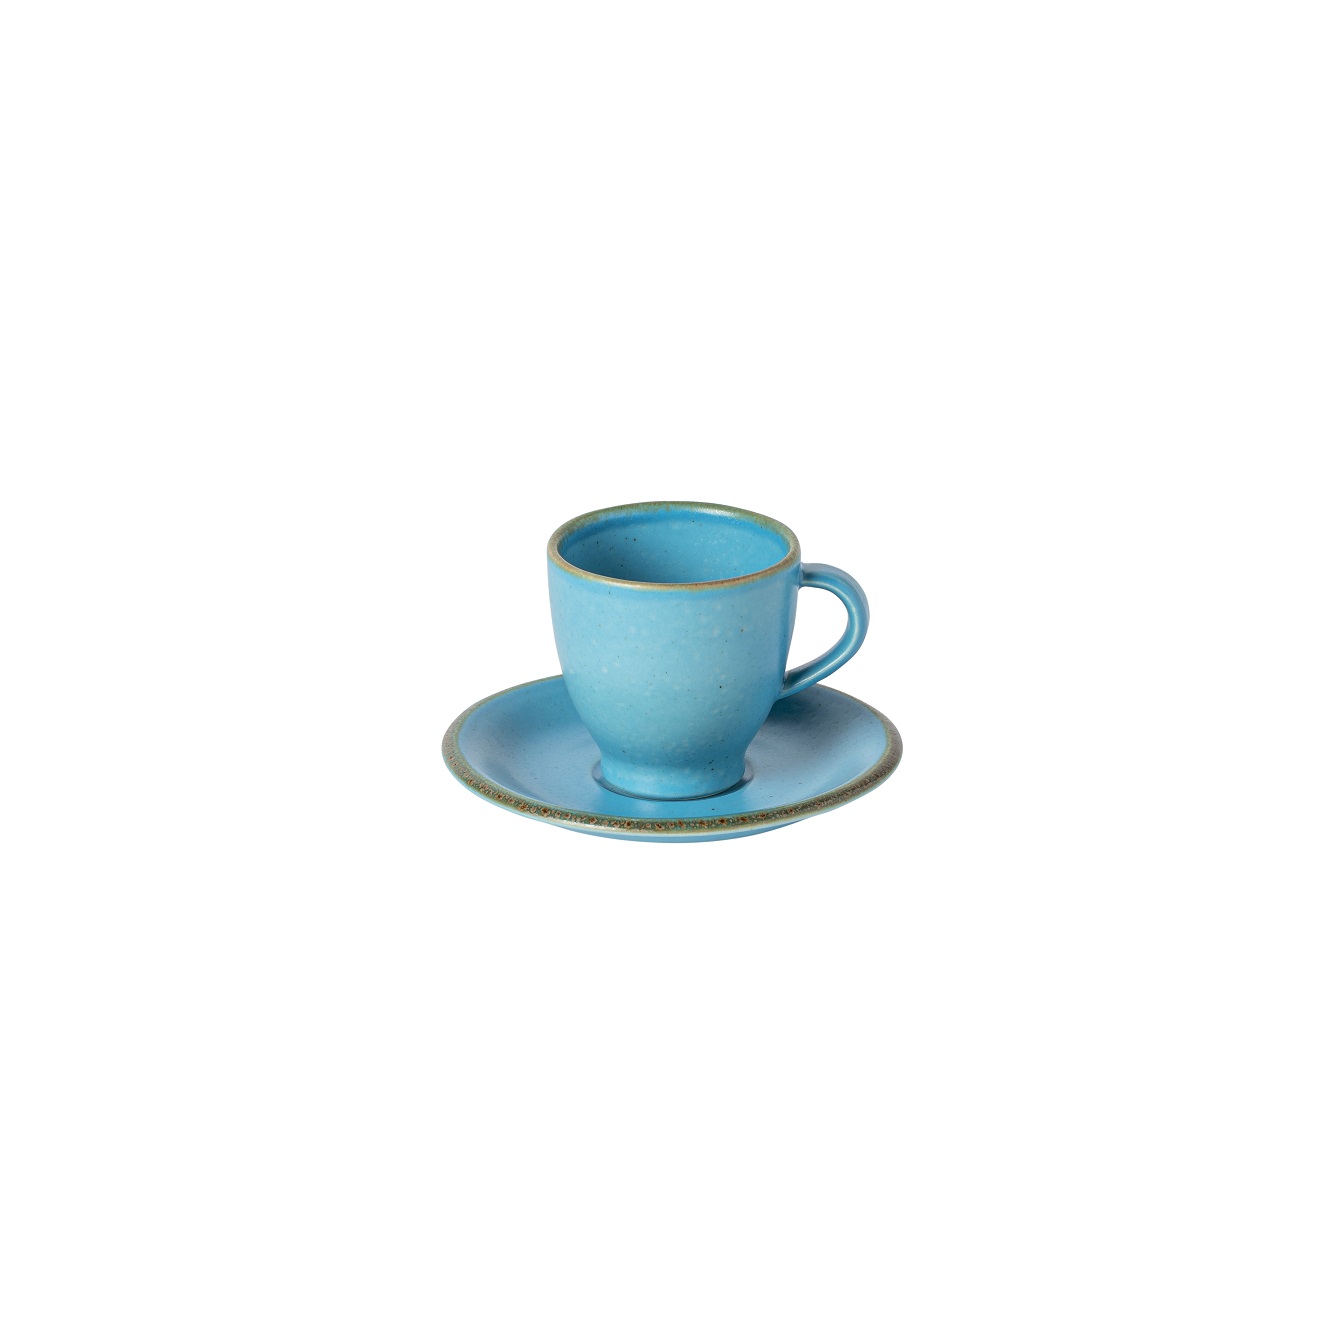 Positano Cyan Coffee Cup & Saucer 0.08l Gift